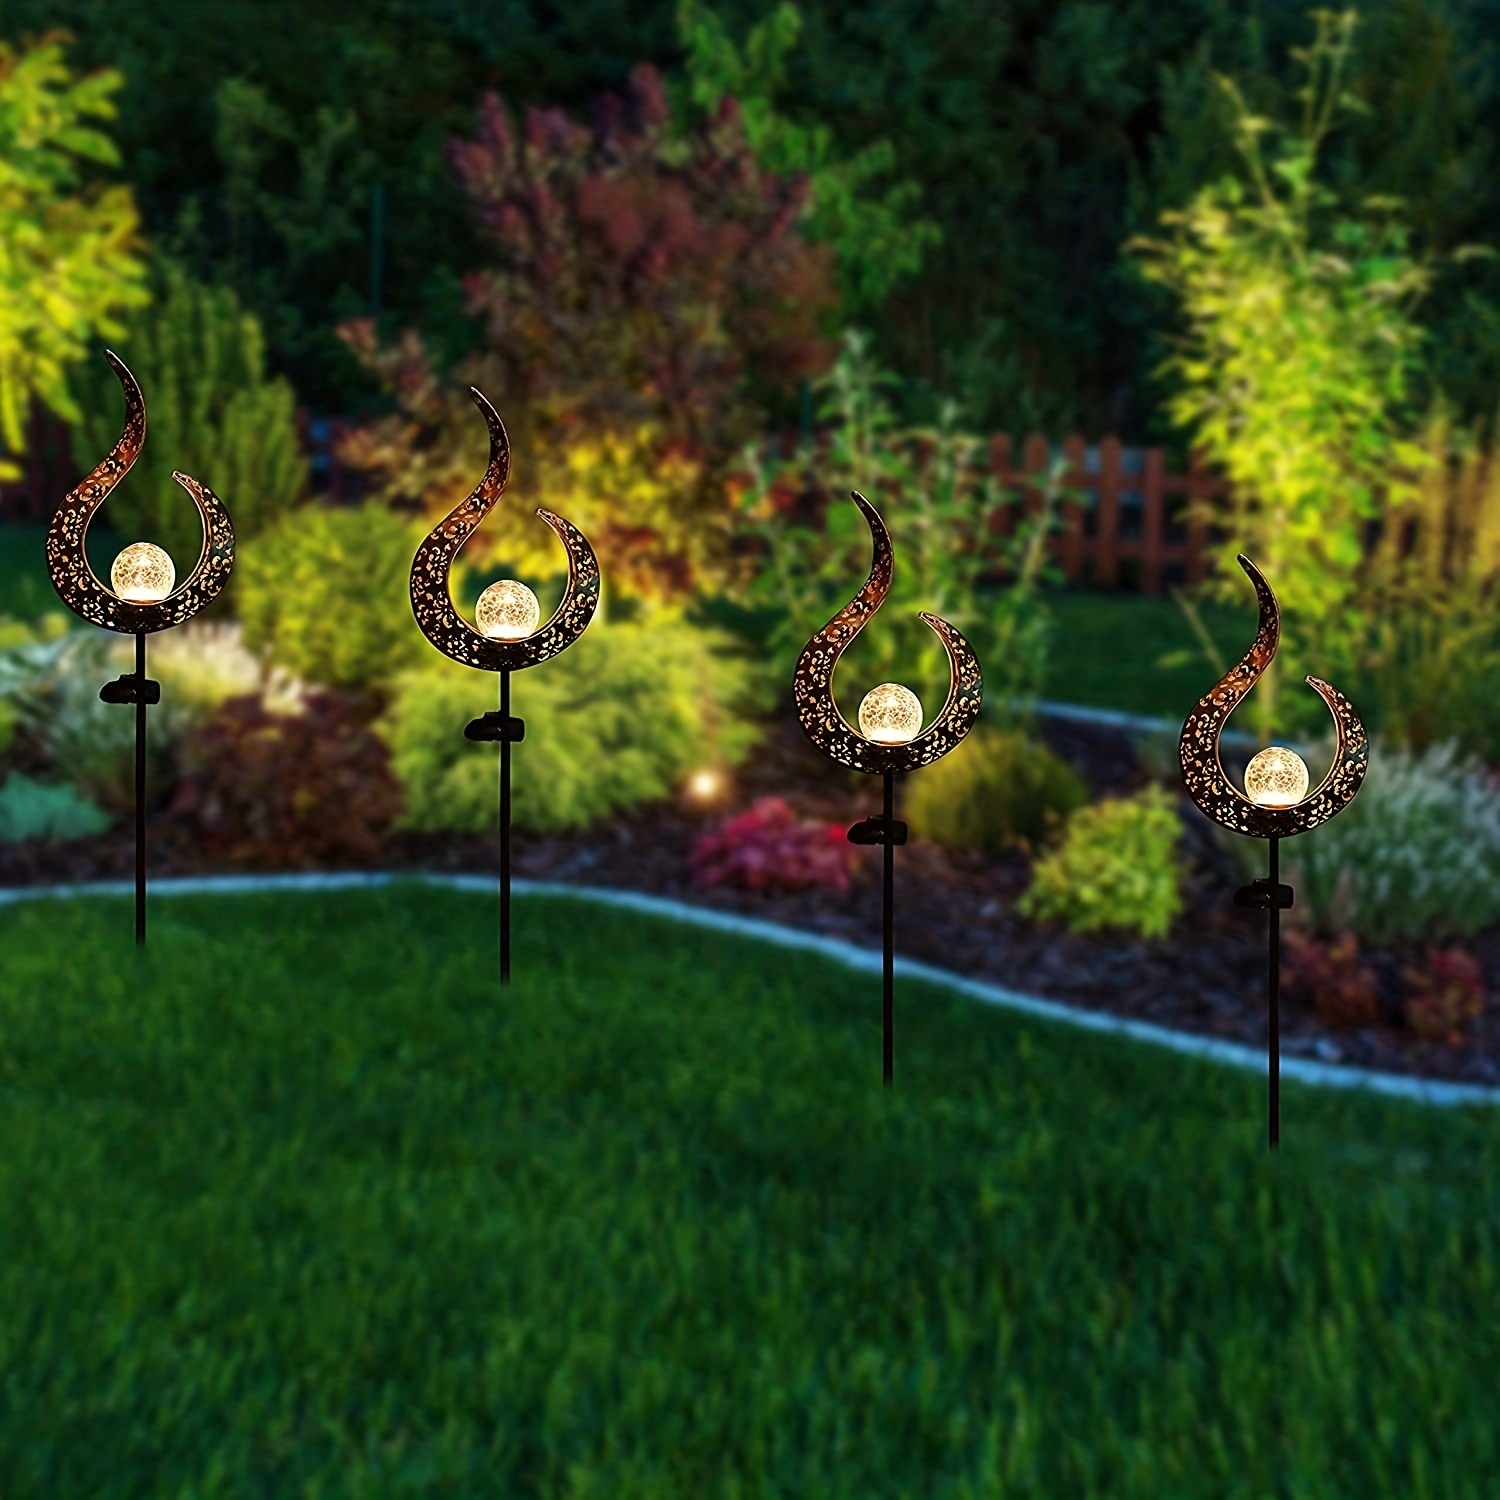 1pc outdoor solar lights garden crackle glass globe stake lights waterproof led lights for garden lawn patio or courtyard details 5